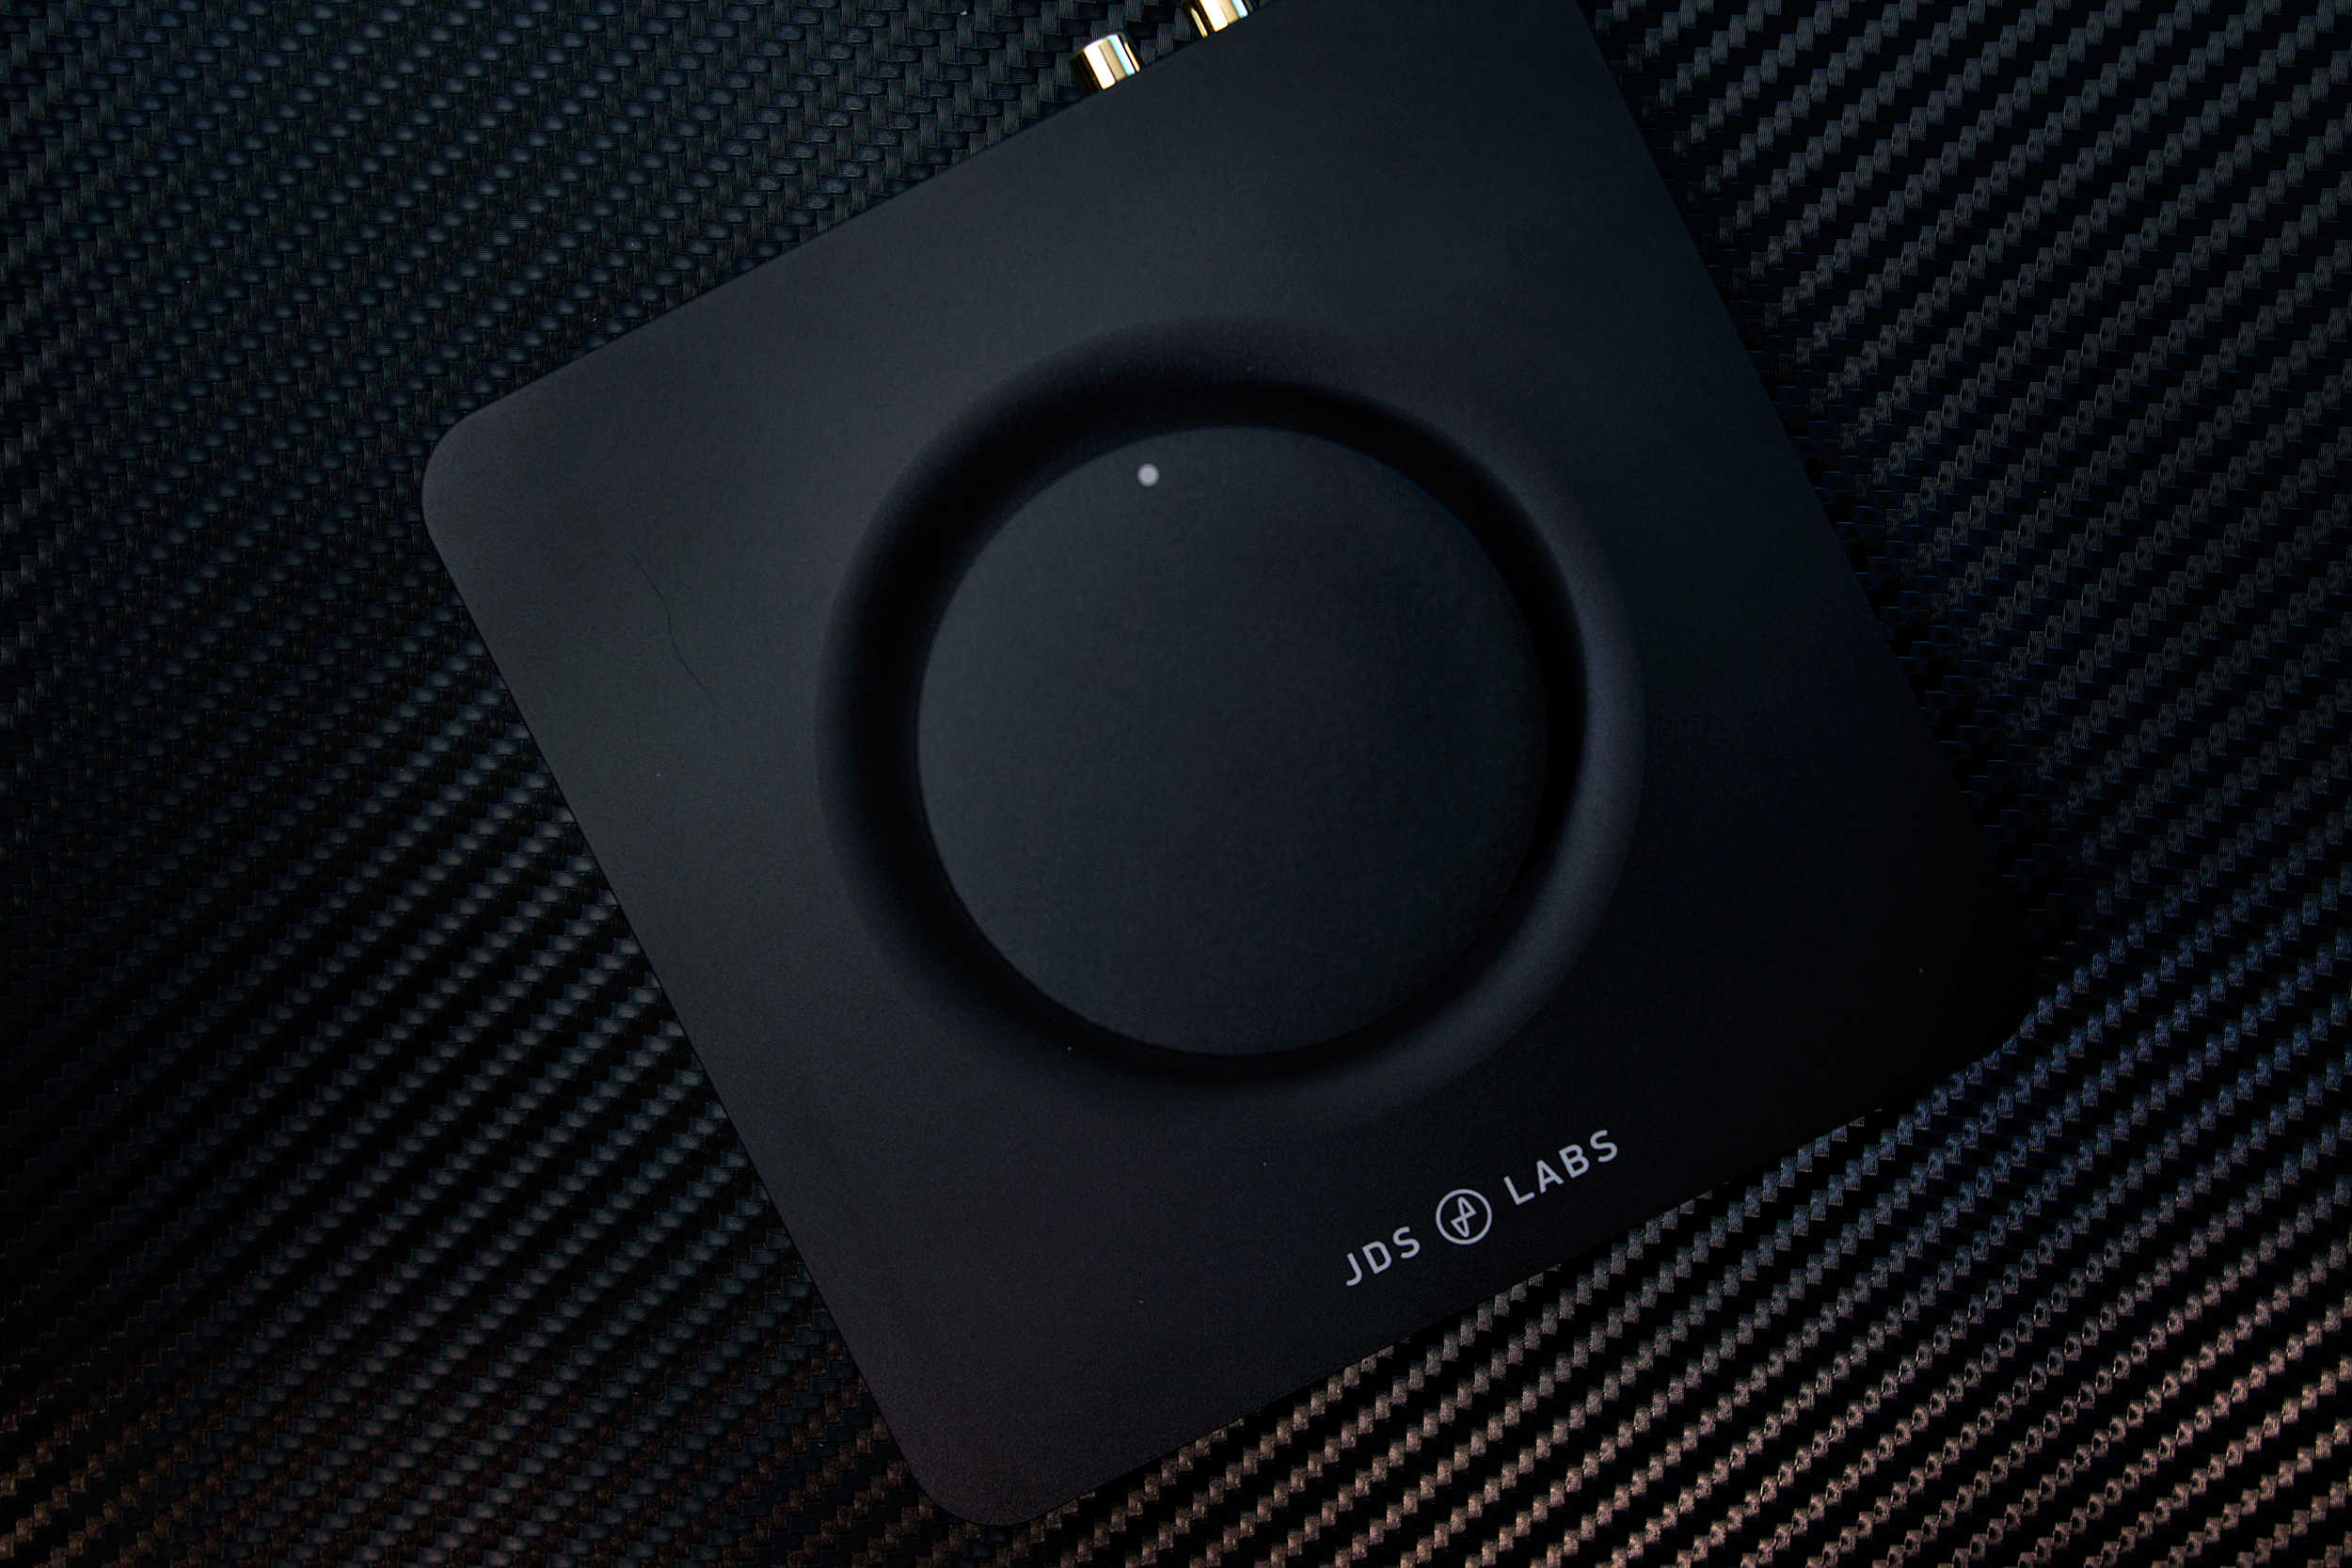 Twist the night away with this headphone amp's gigantic dial.